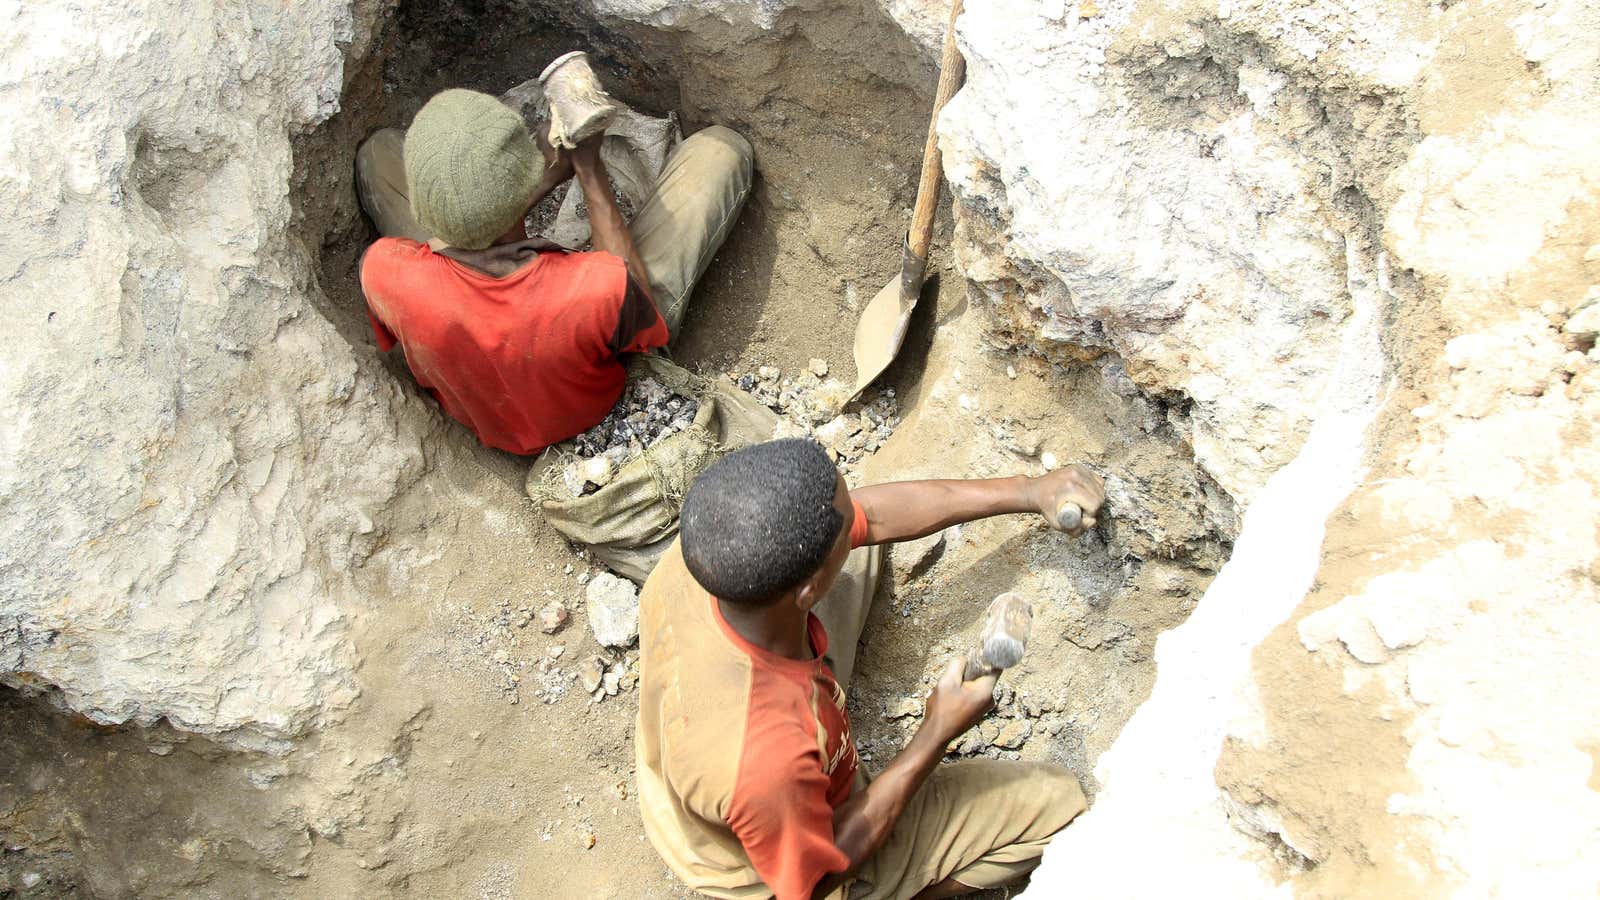 Last month, the governor of South Kivu province suspended six mining companies.